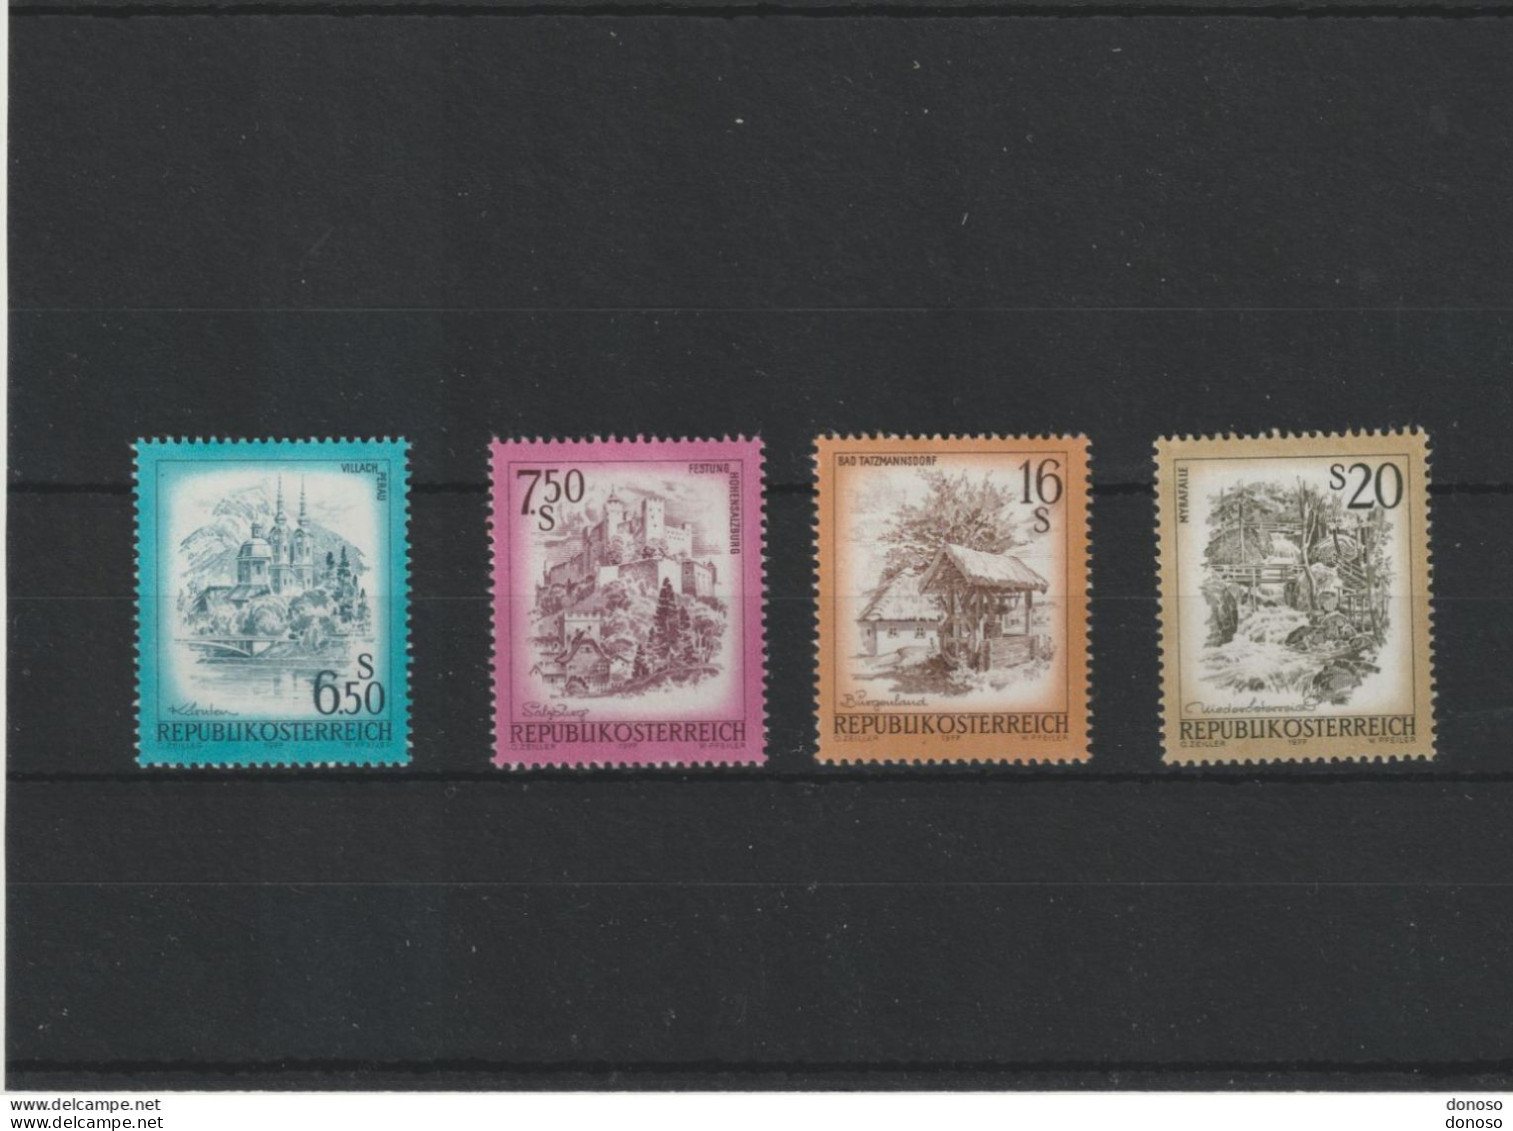 AUTRICHE 1977 Série Courante, Paysages  Yvert 1378-1381 NEUF** MNH Cote 15 Euros - Unused Stamps